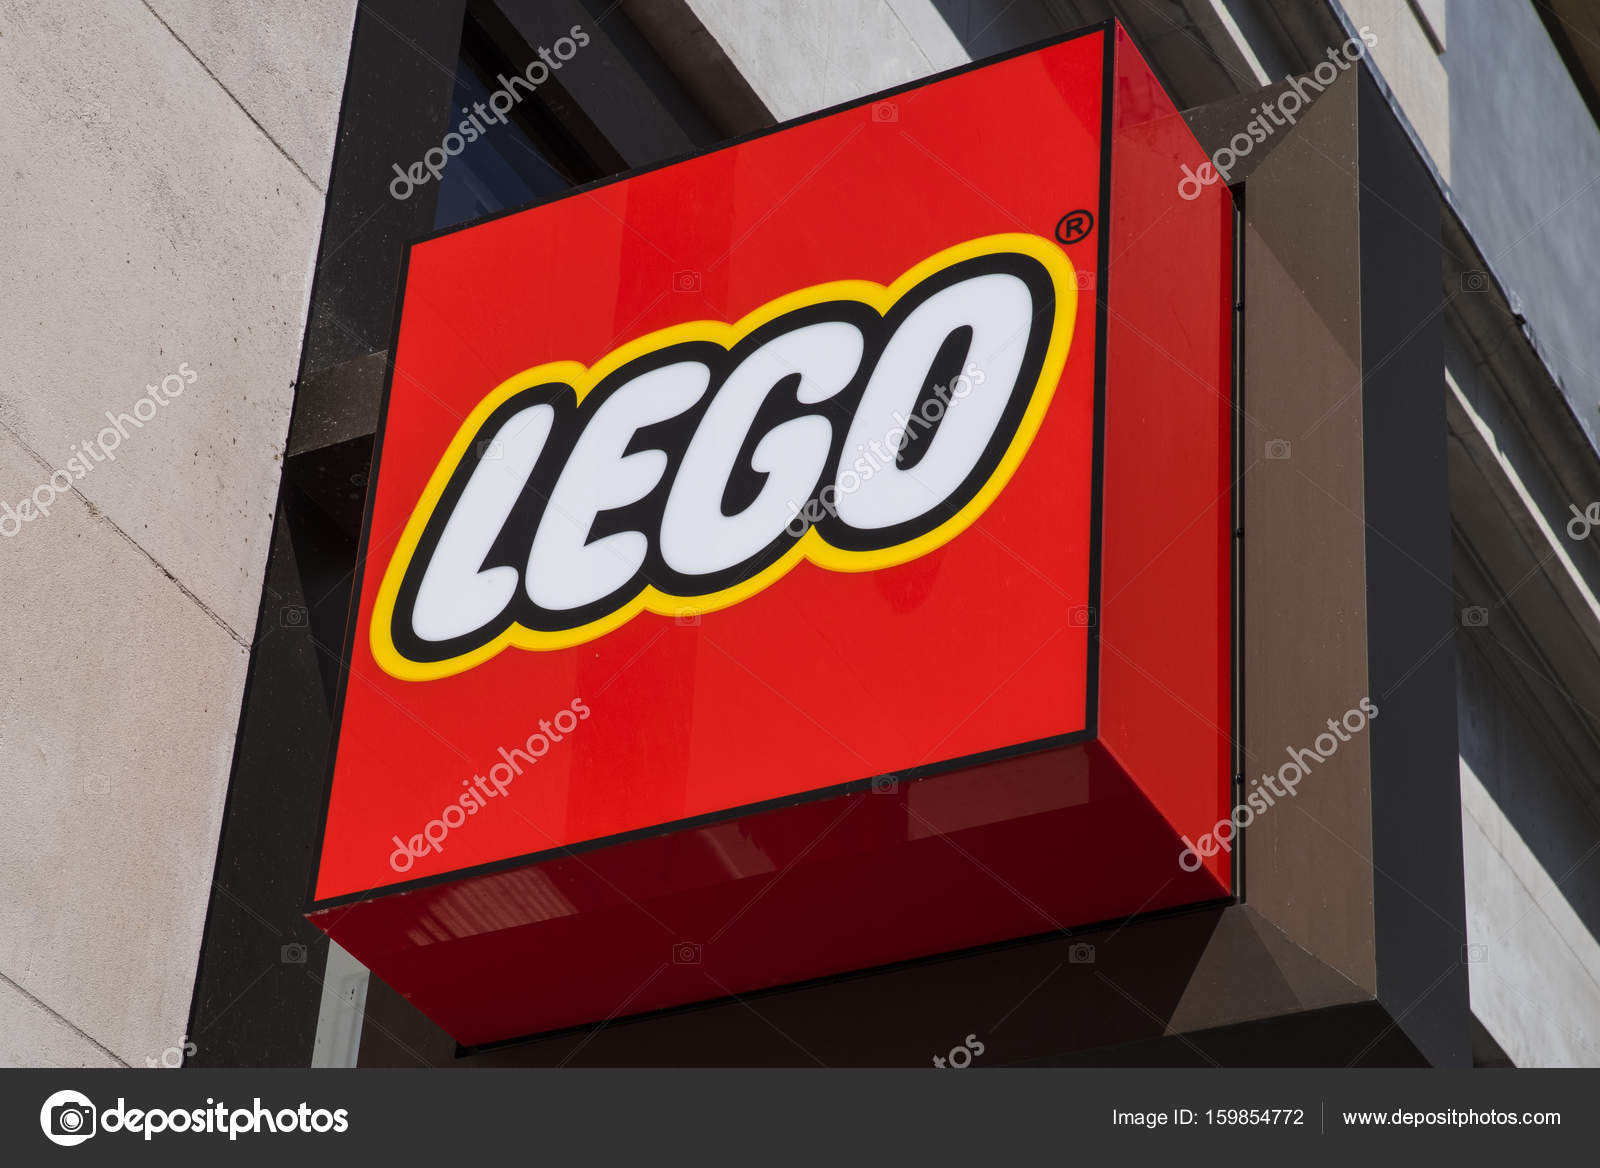 Lego Store Sign – Stock Editorial Photo © #159854772